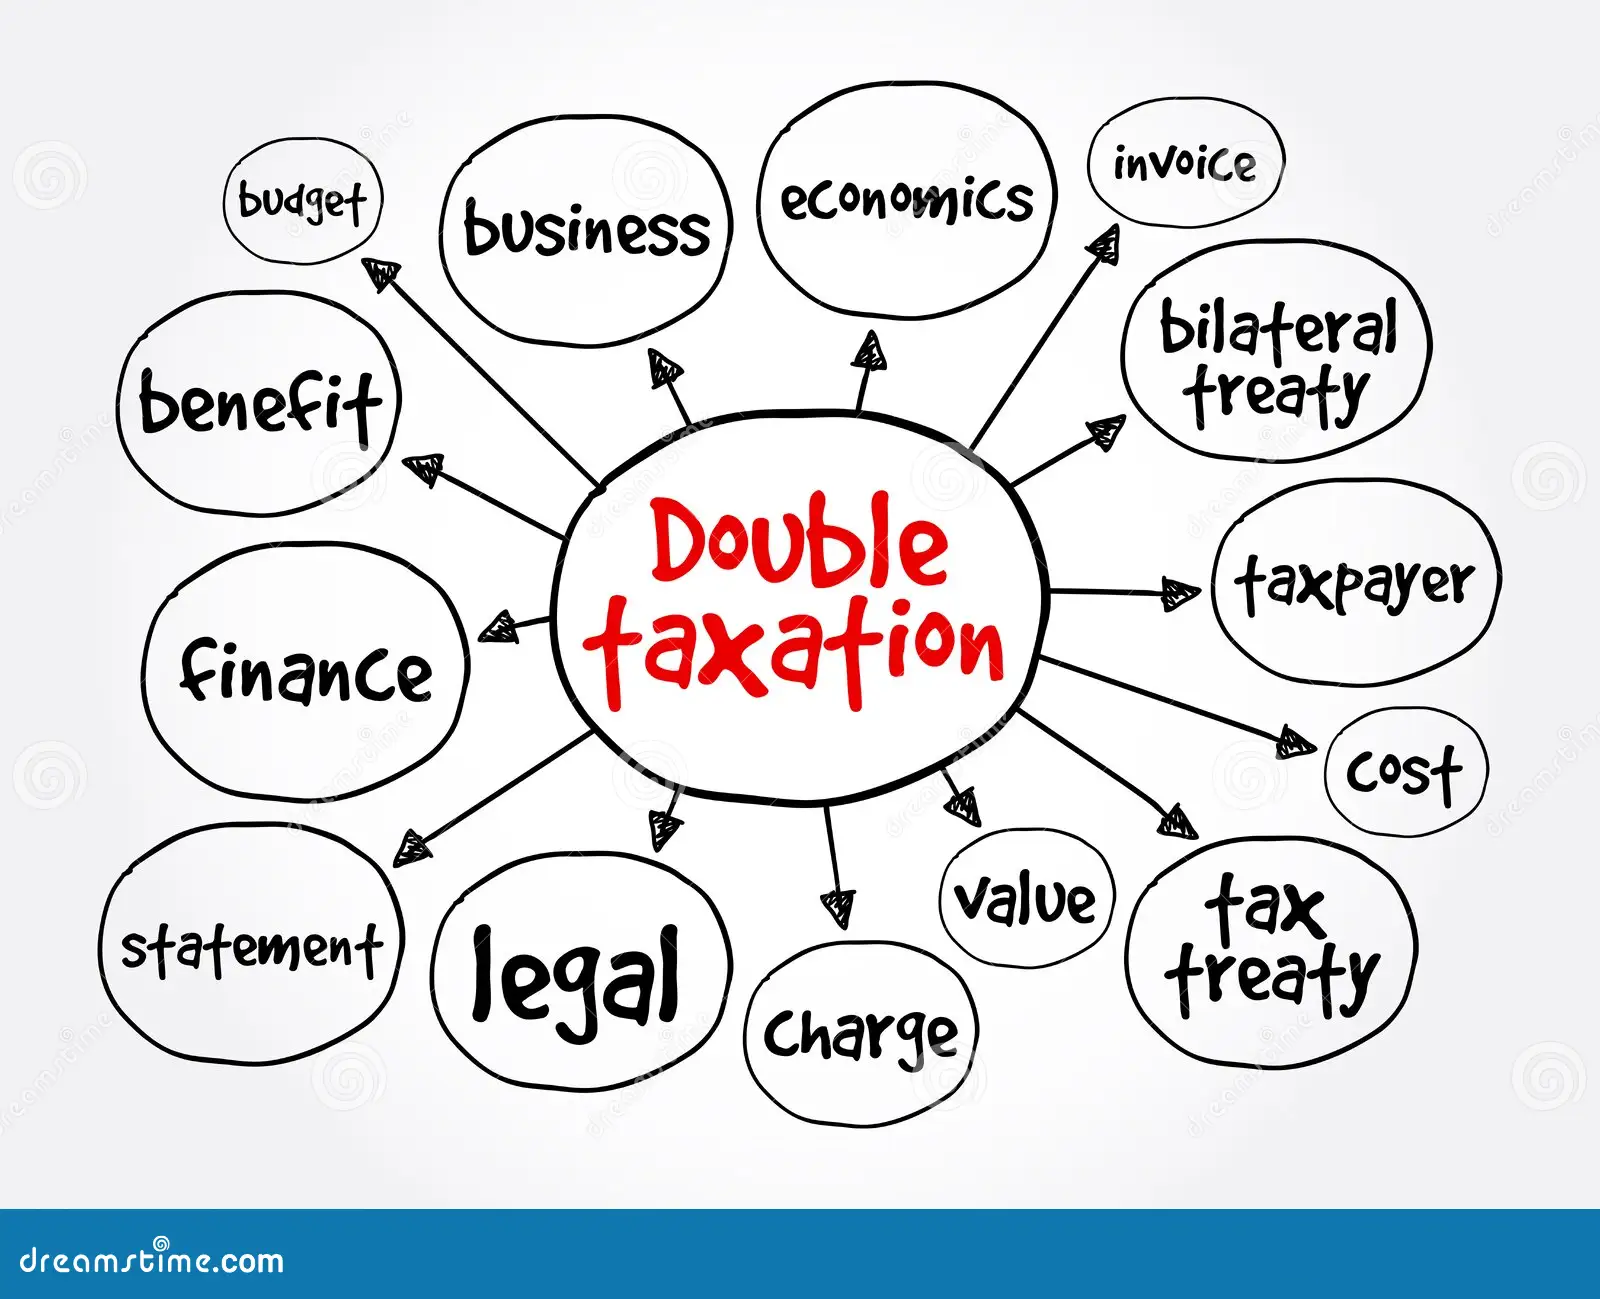 Eliminating Double Taxation With A Reinvoicing Center